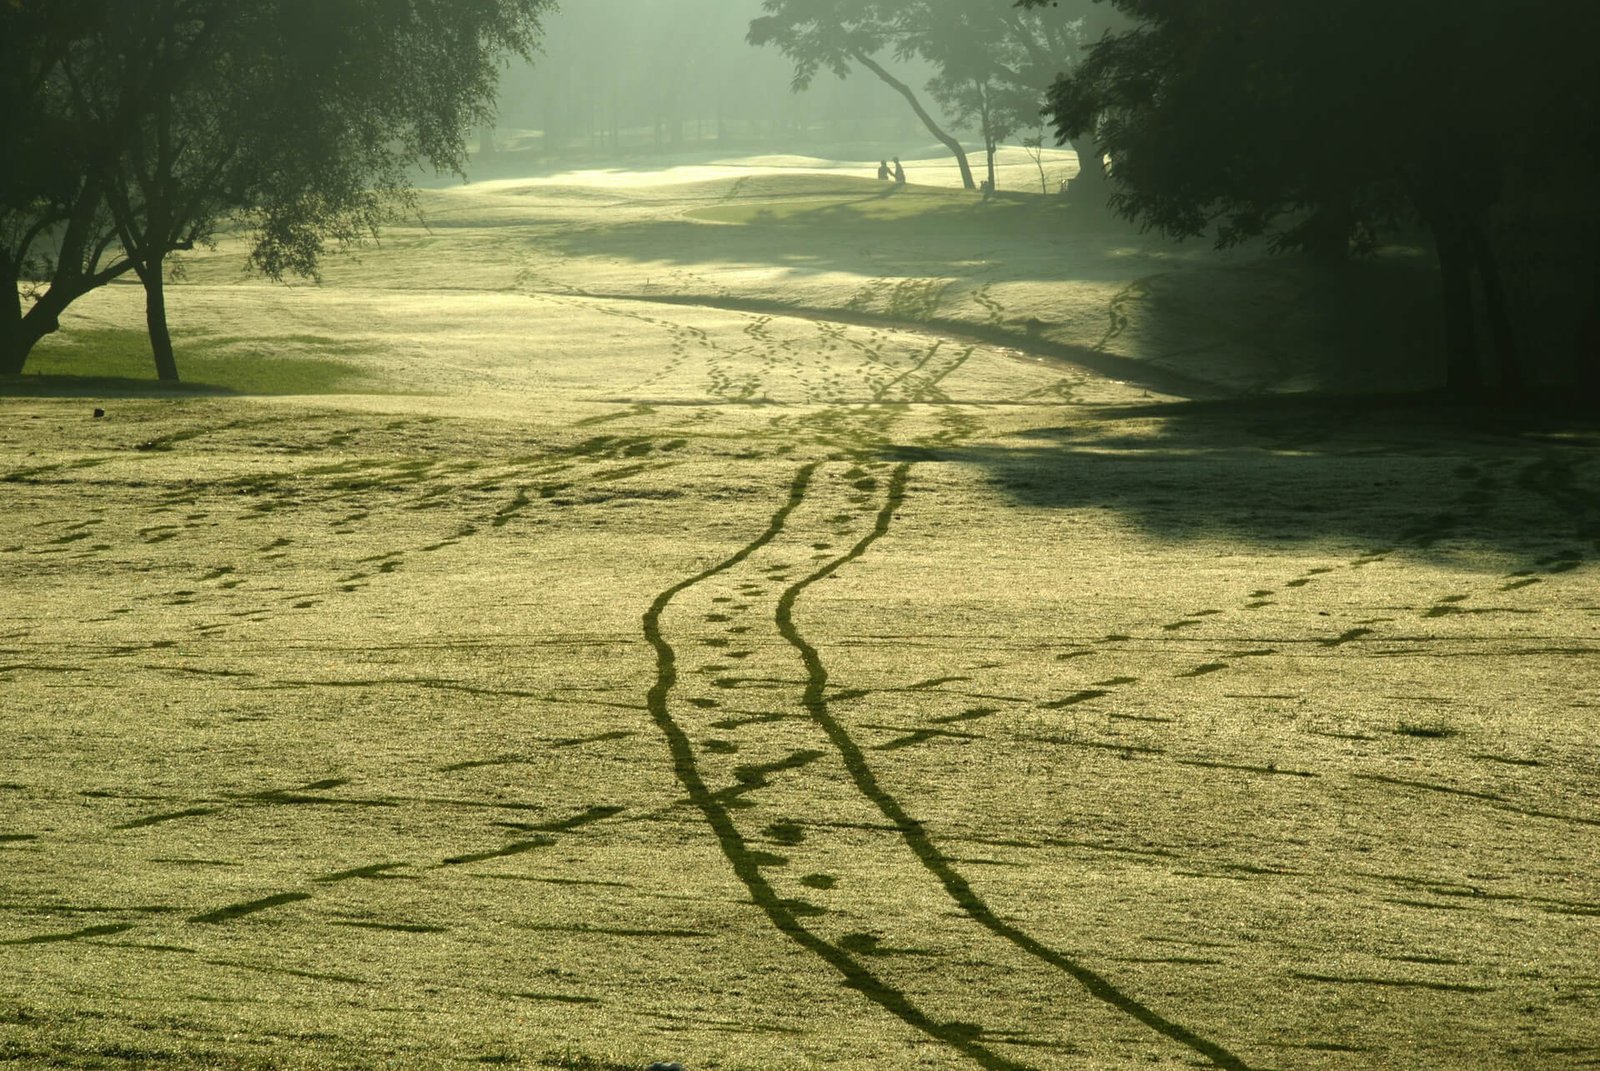 Bad golf etiquette - golf cart tracks on the course